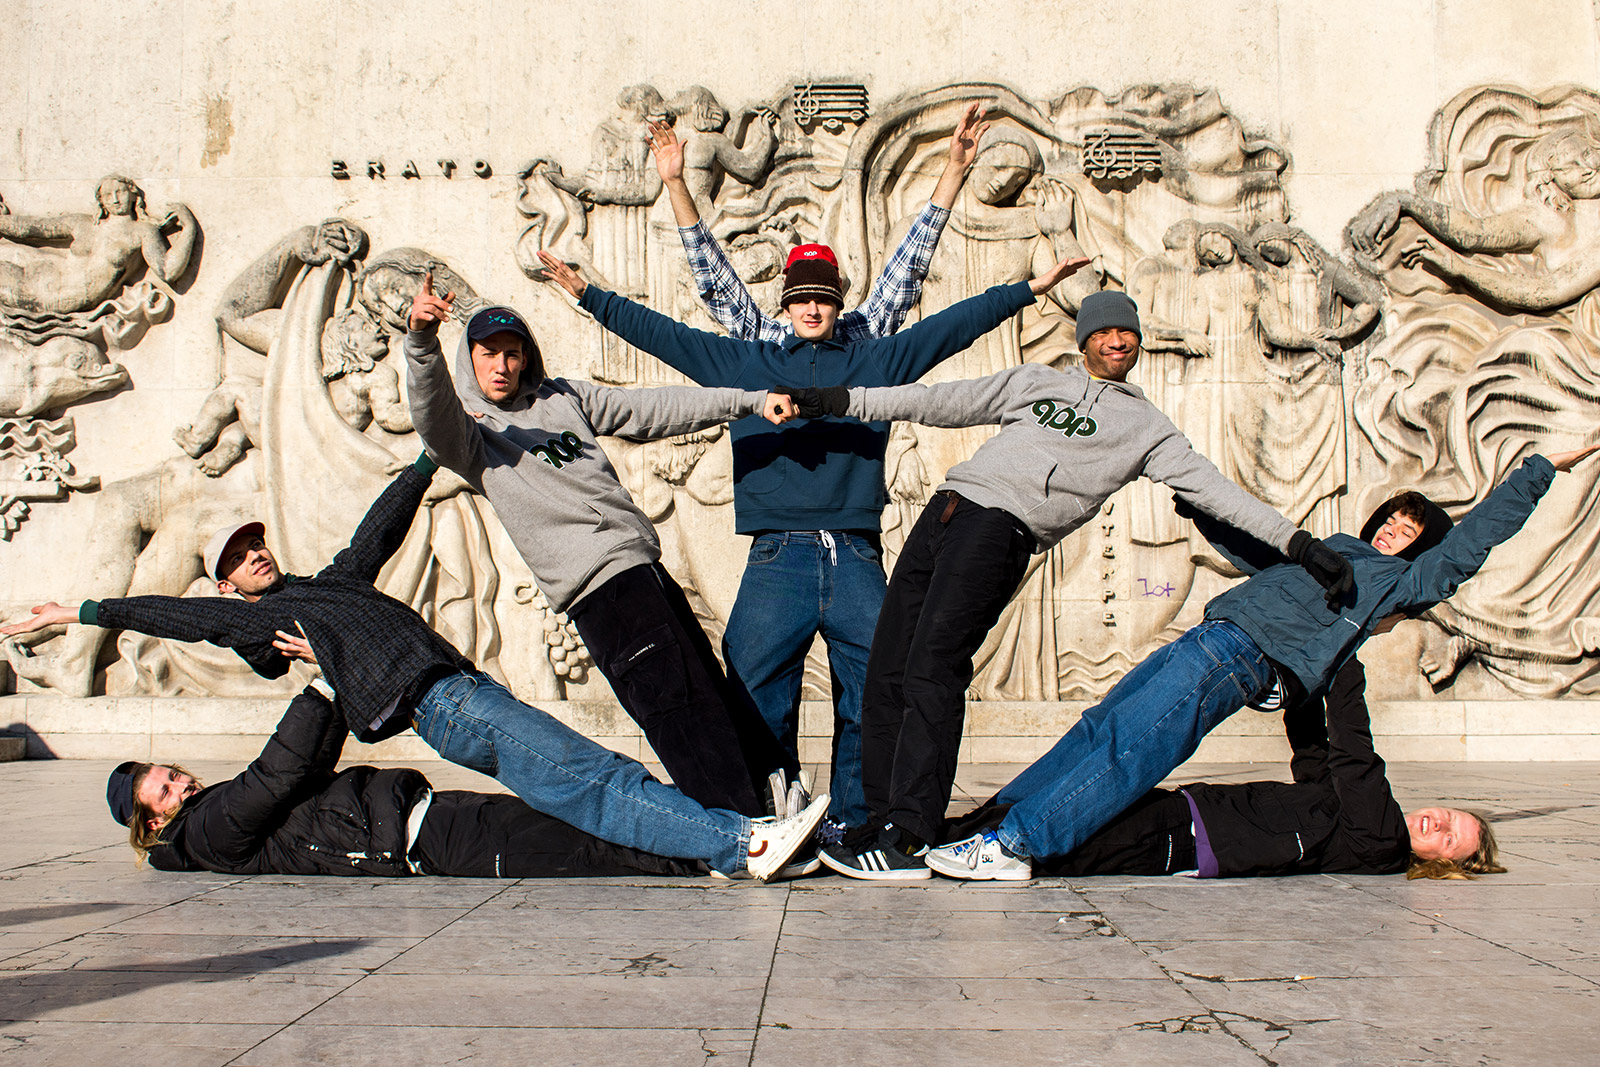 Pop Trading Company’s riders forming a human tower on a skate trip to Paris.